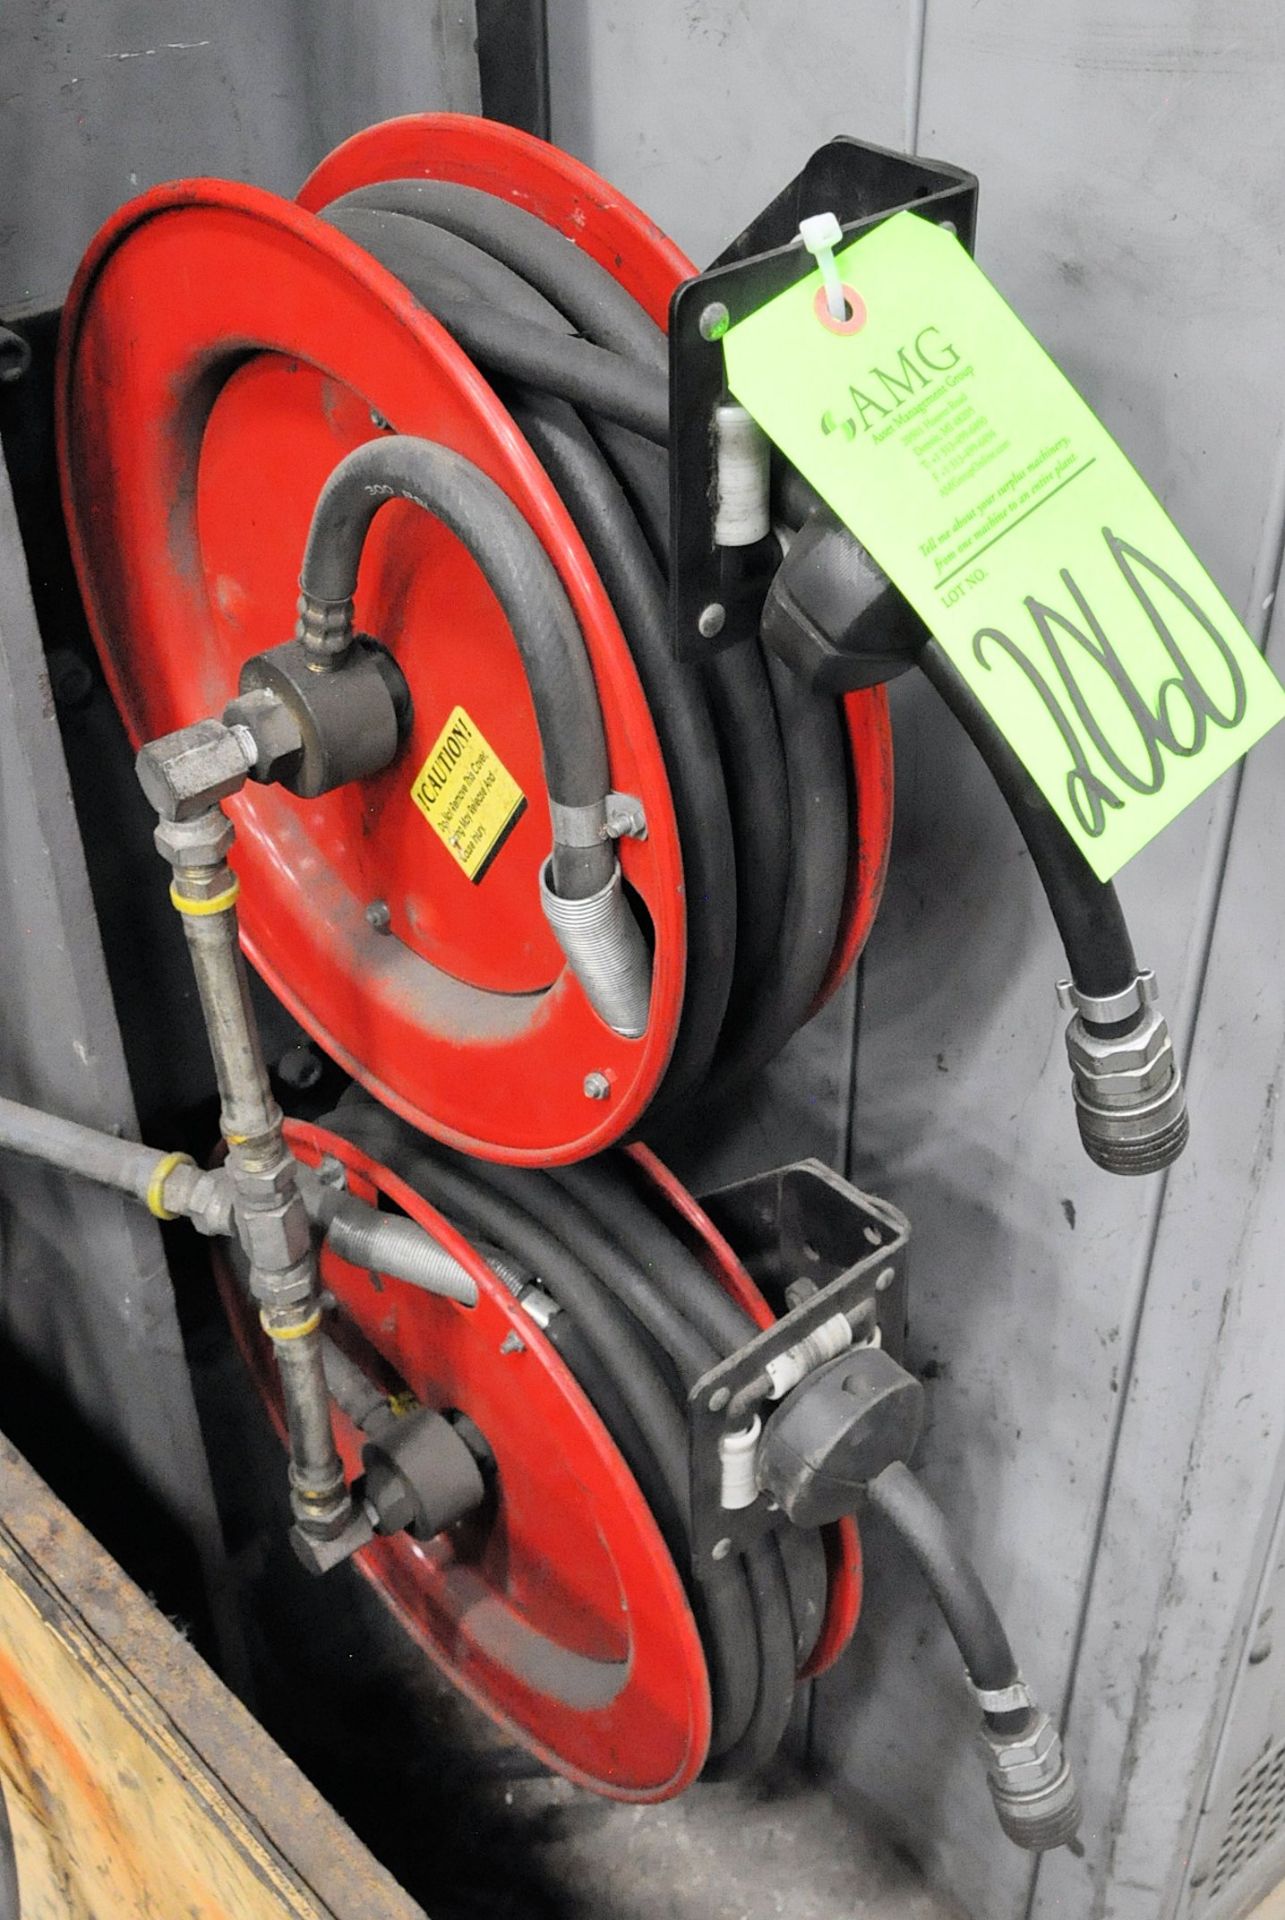 Lot-(4) Post Mounted Retractable Air Hose Reels, (G-23), (Green Tag)